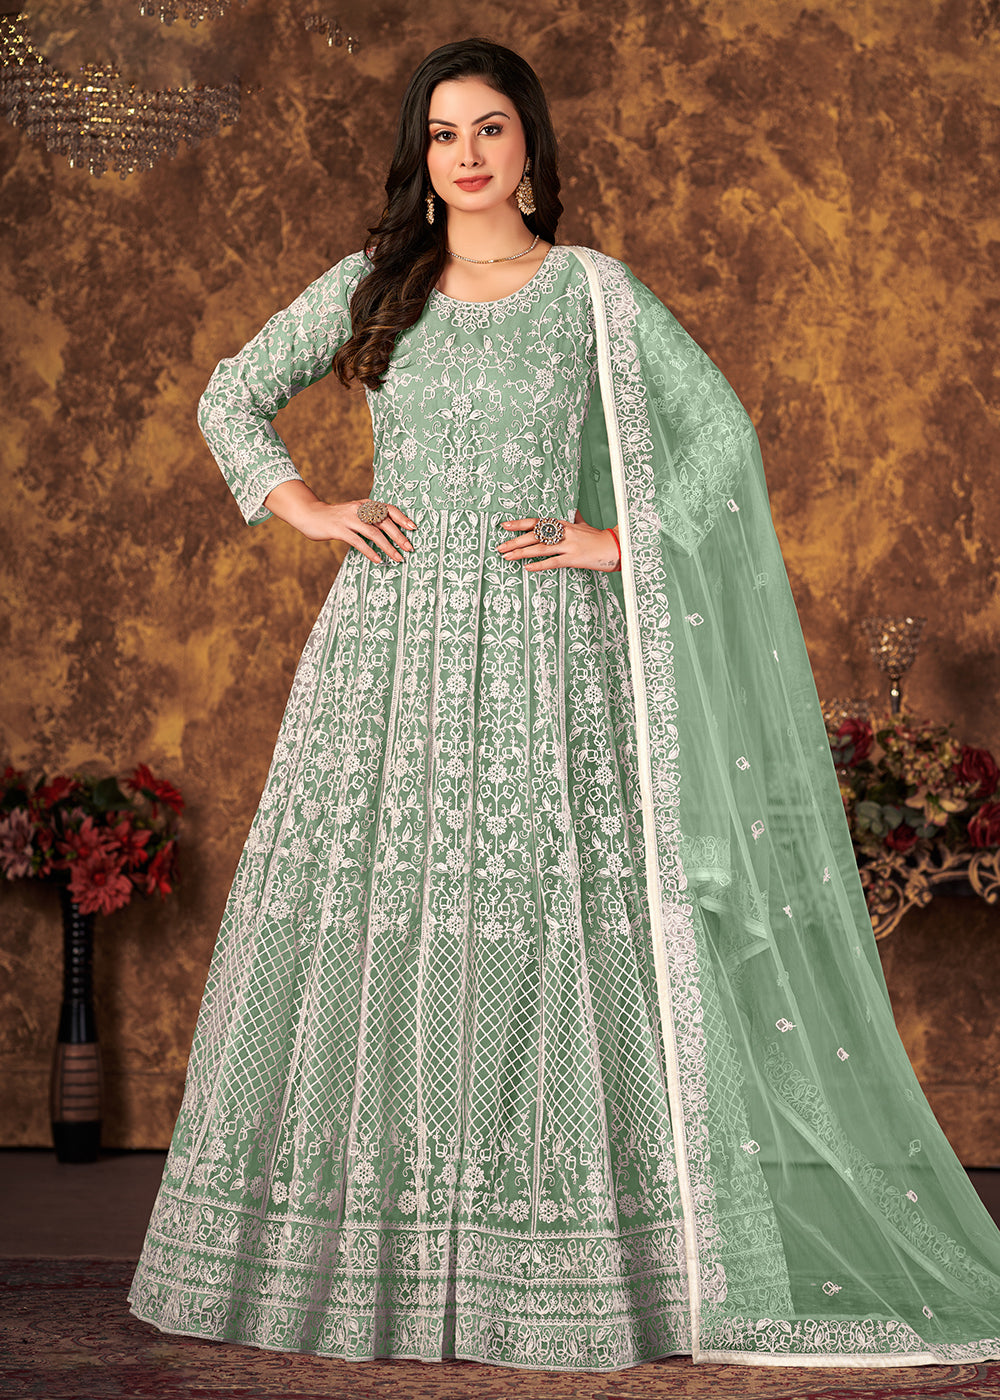 Buy Now Tempting Sea Green Cording Embroidered Wedding Anarkali Dress Online in Canada at Empress Clothing. 